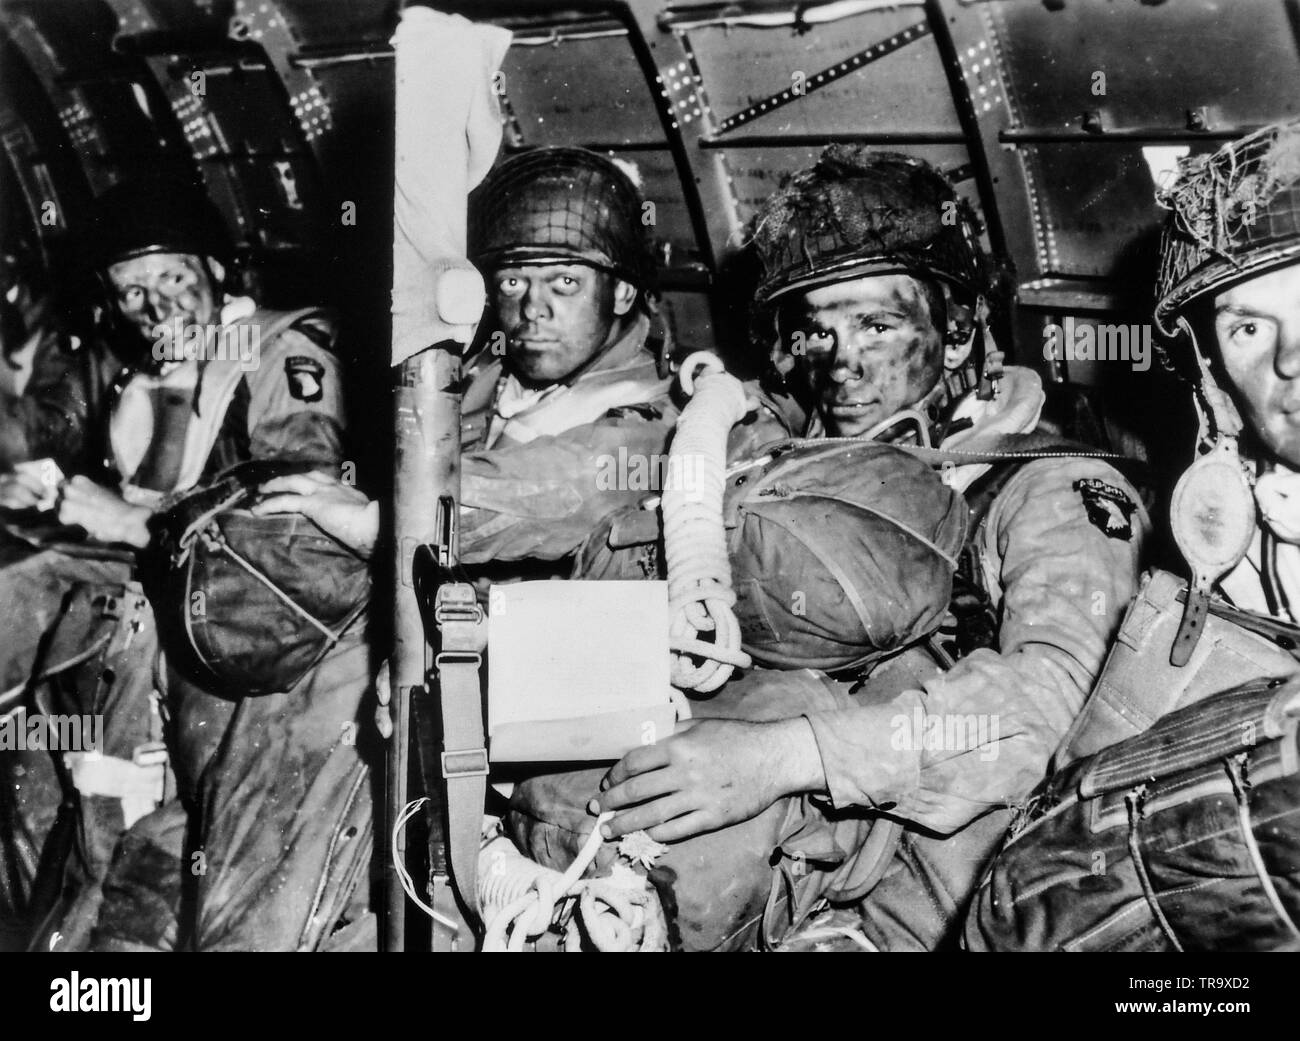 See You in Berlin. Resolute faces of paratroopers just before they took off for the initial assault of D-Day. Paratrooper in foreground has just read General Eisenhower's message of good luck and clasps his bazooka in determination. Note Eisenhower's D-Day order in hands of paratrooper in foreground. June 6, 1944 Stock Photo